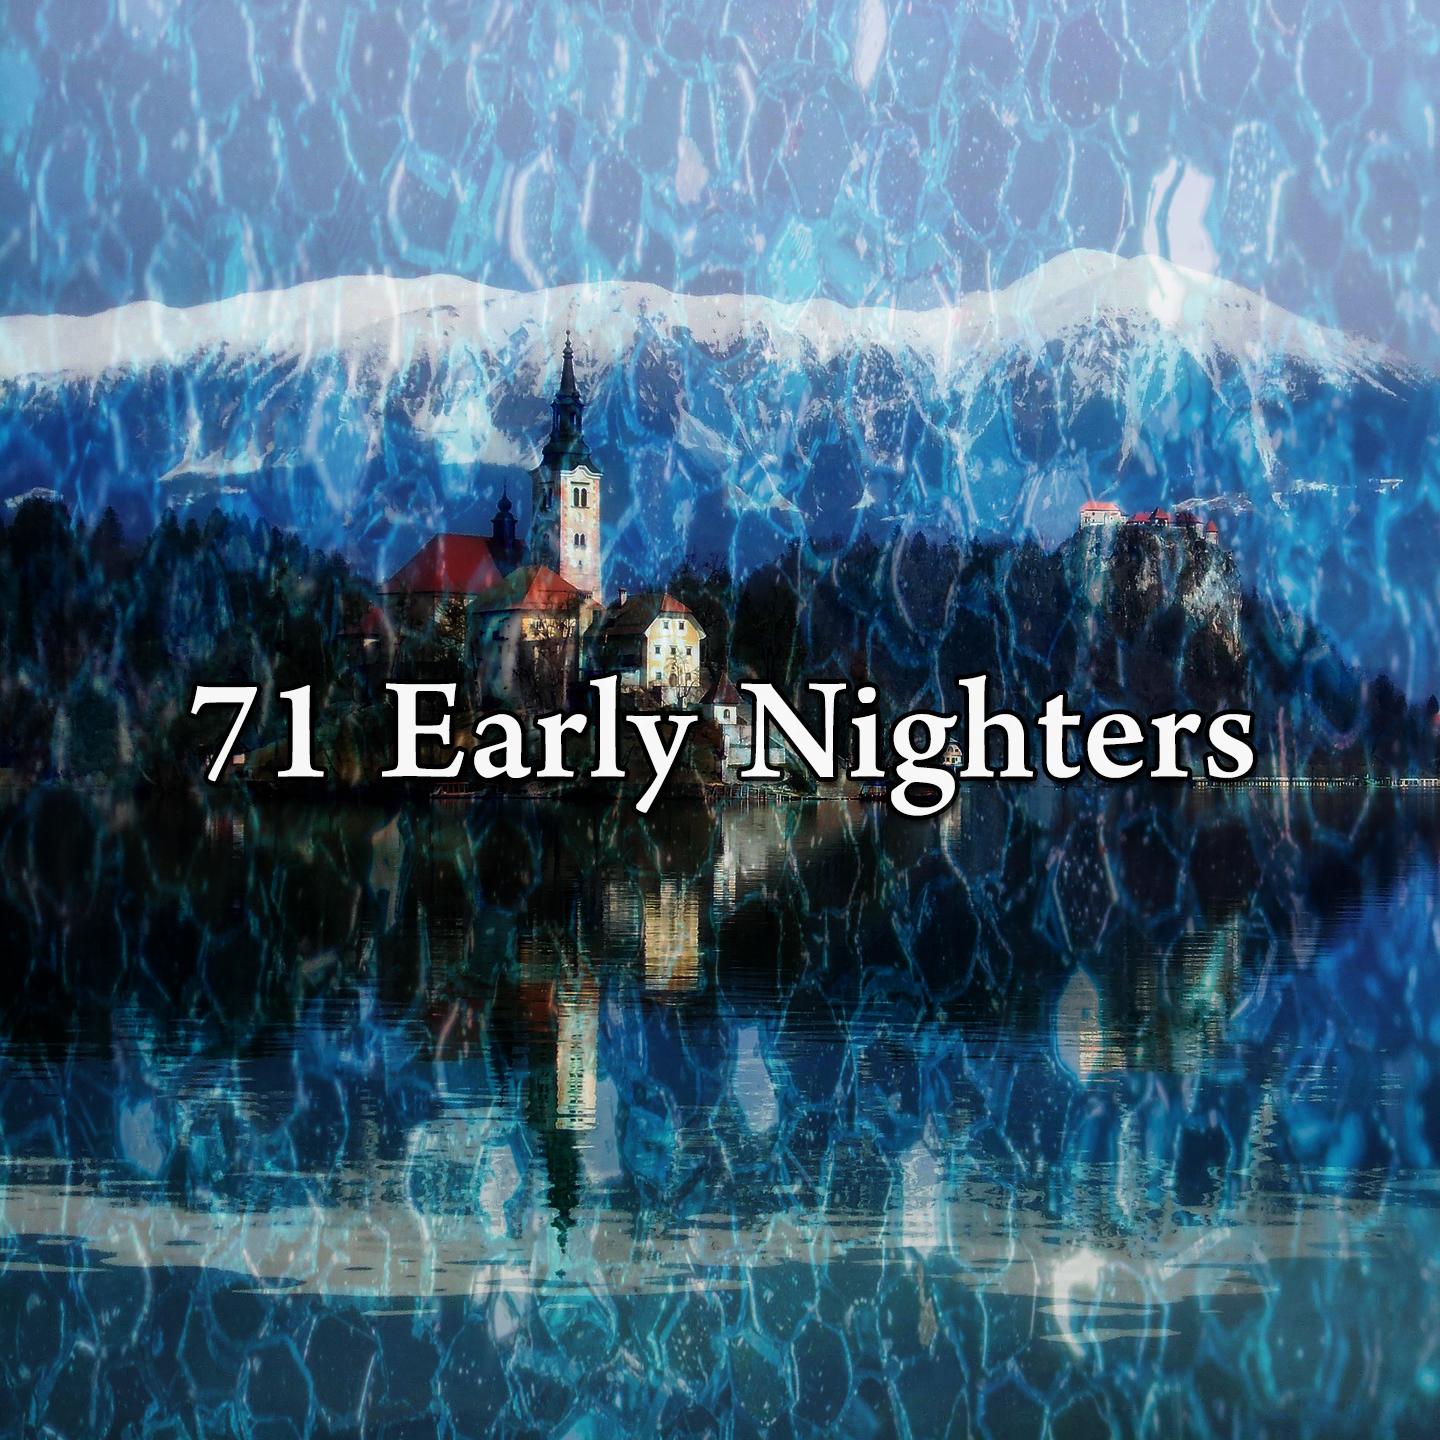 71 Early Nighters